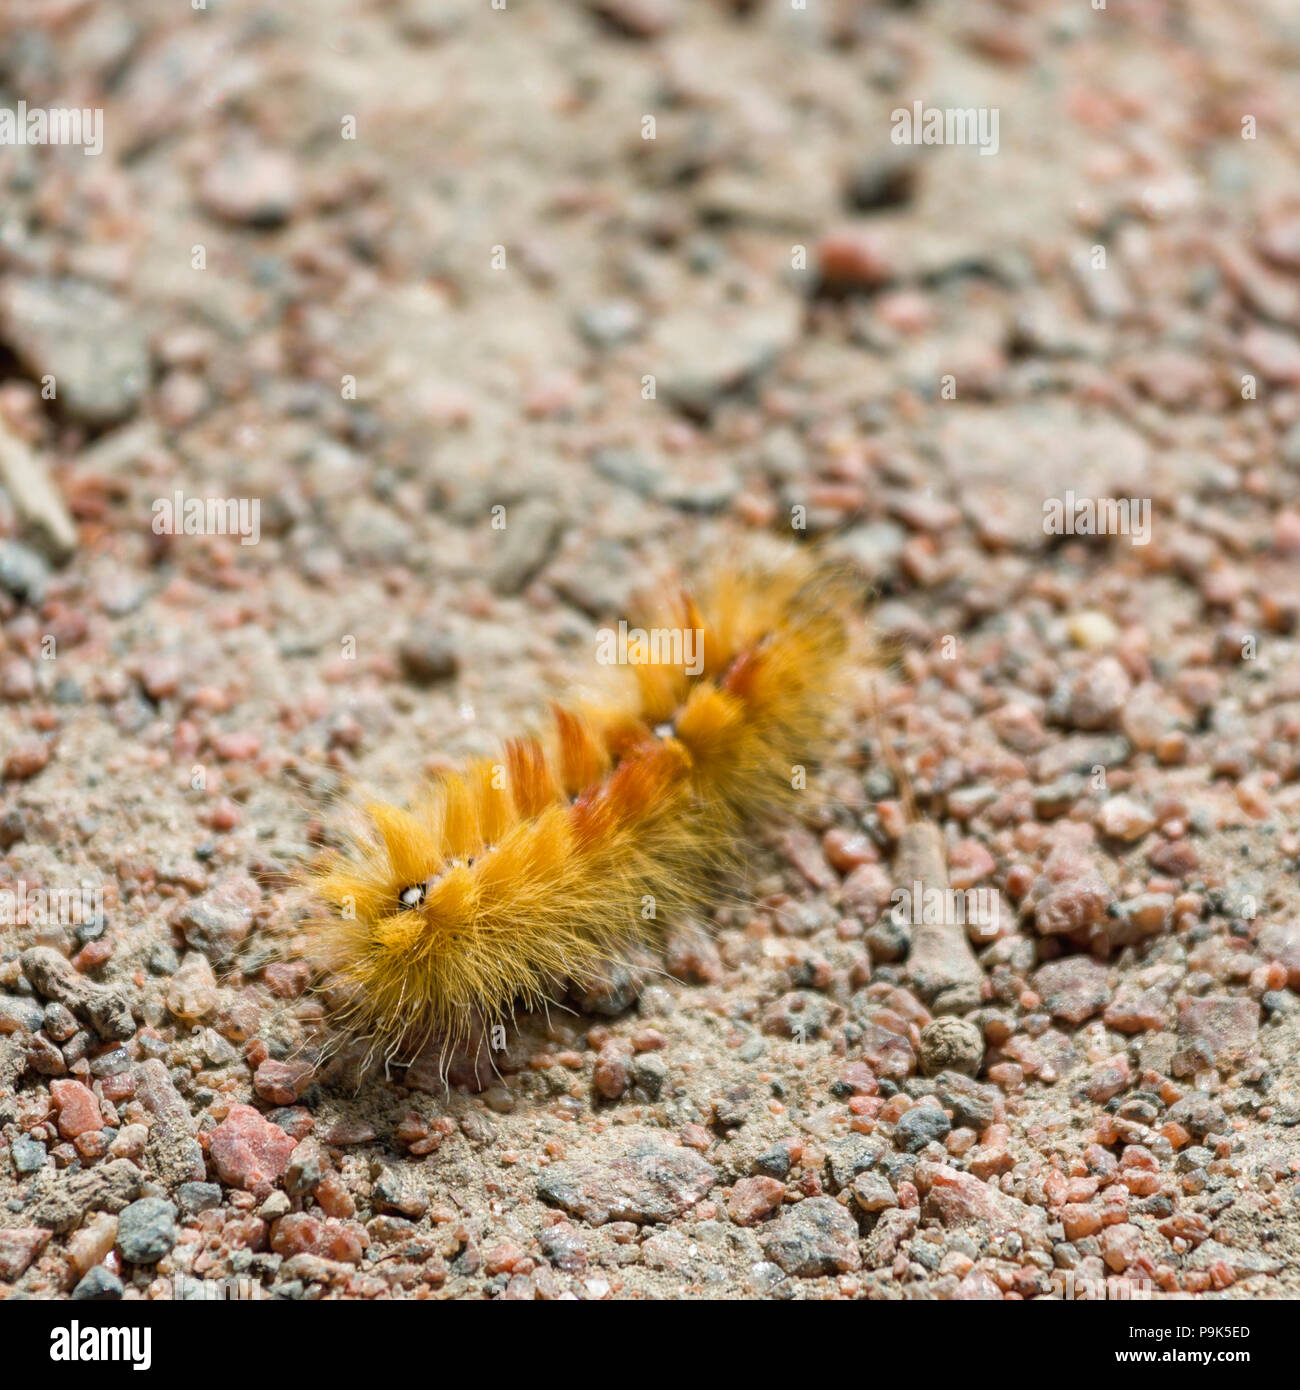 STORA AMUNDÖN, SWEDEN - JULY 16 2018: Close up macro view of yellow hairy caterpillar larvae Lepidopteraon outdoors with coarse sand ground background Stock Photo